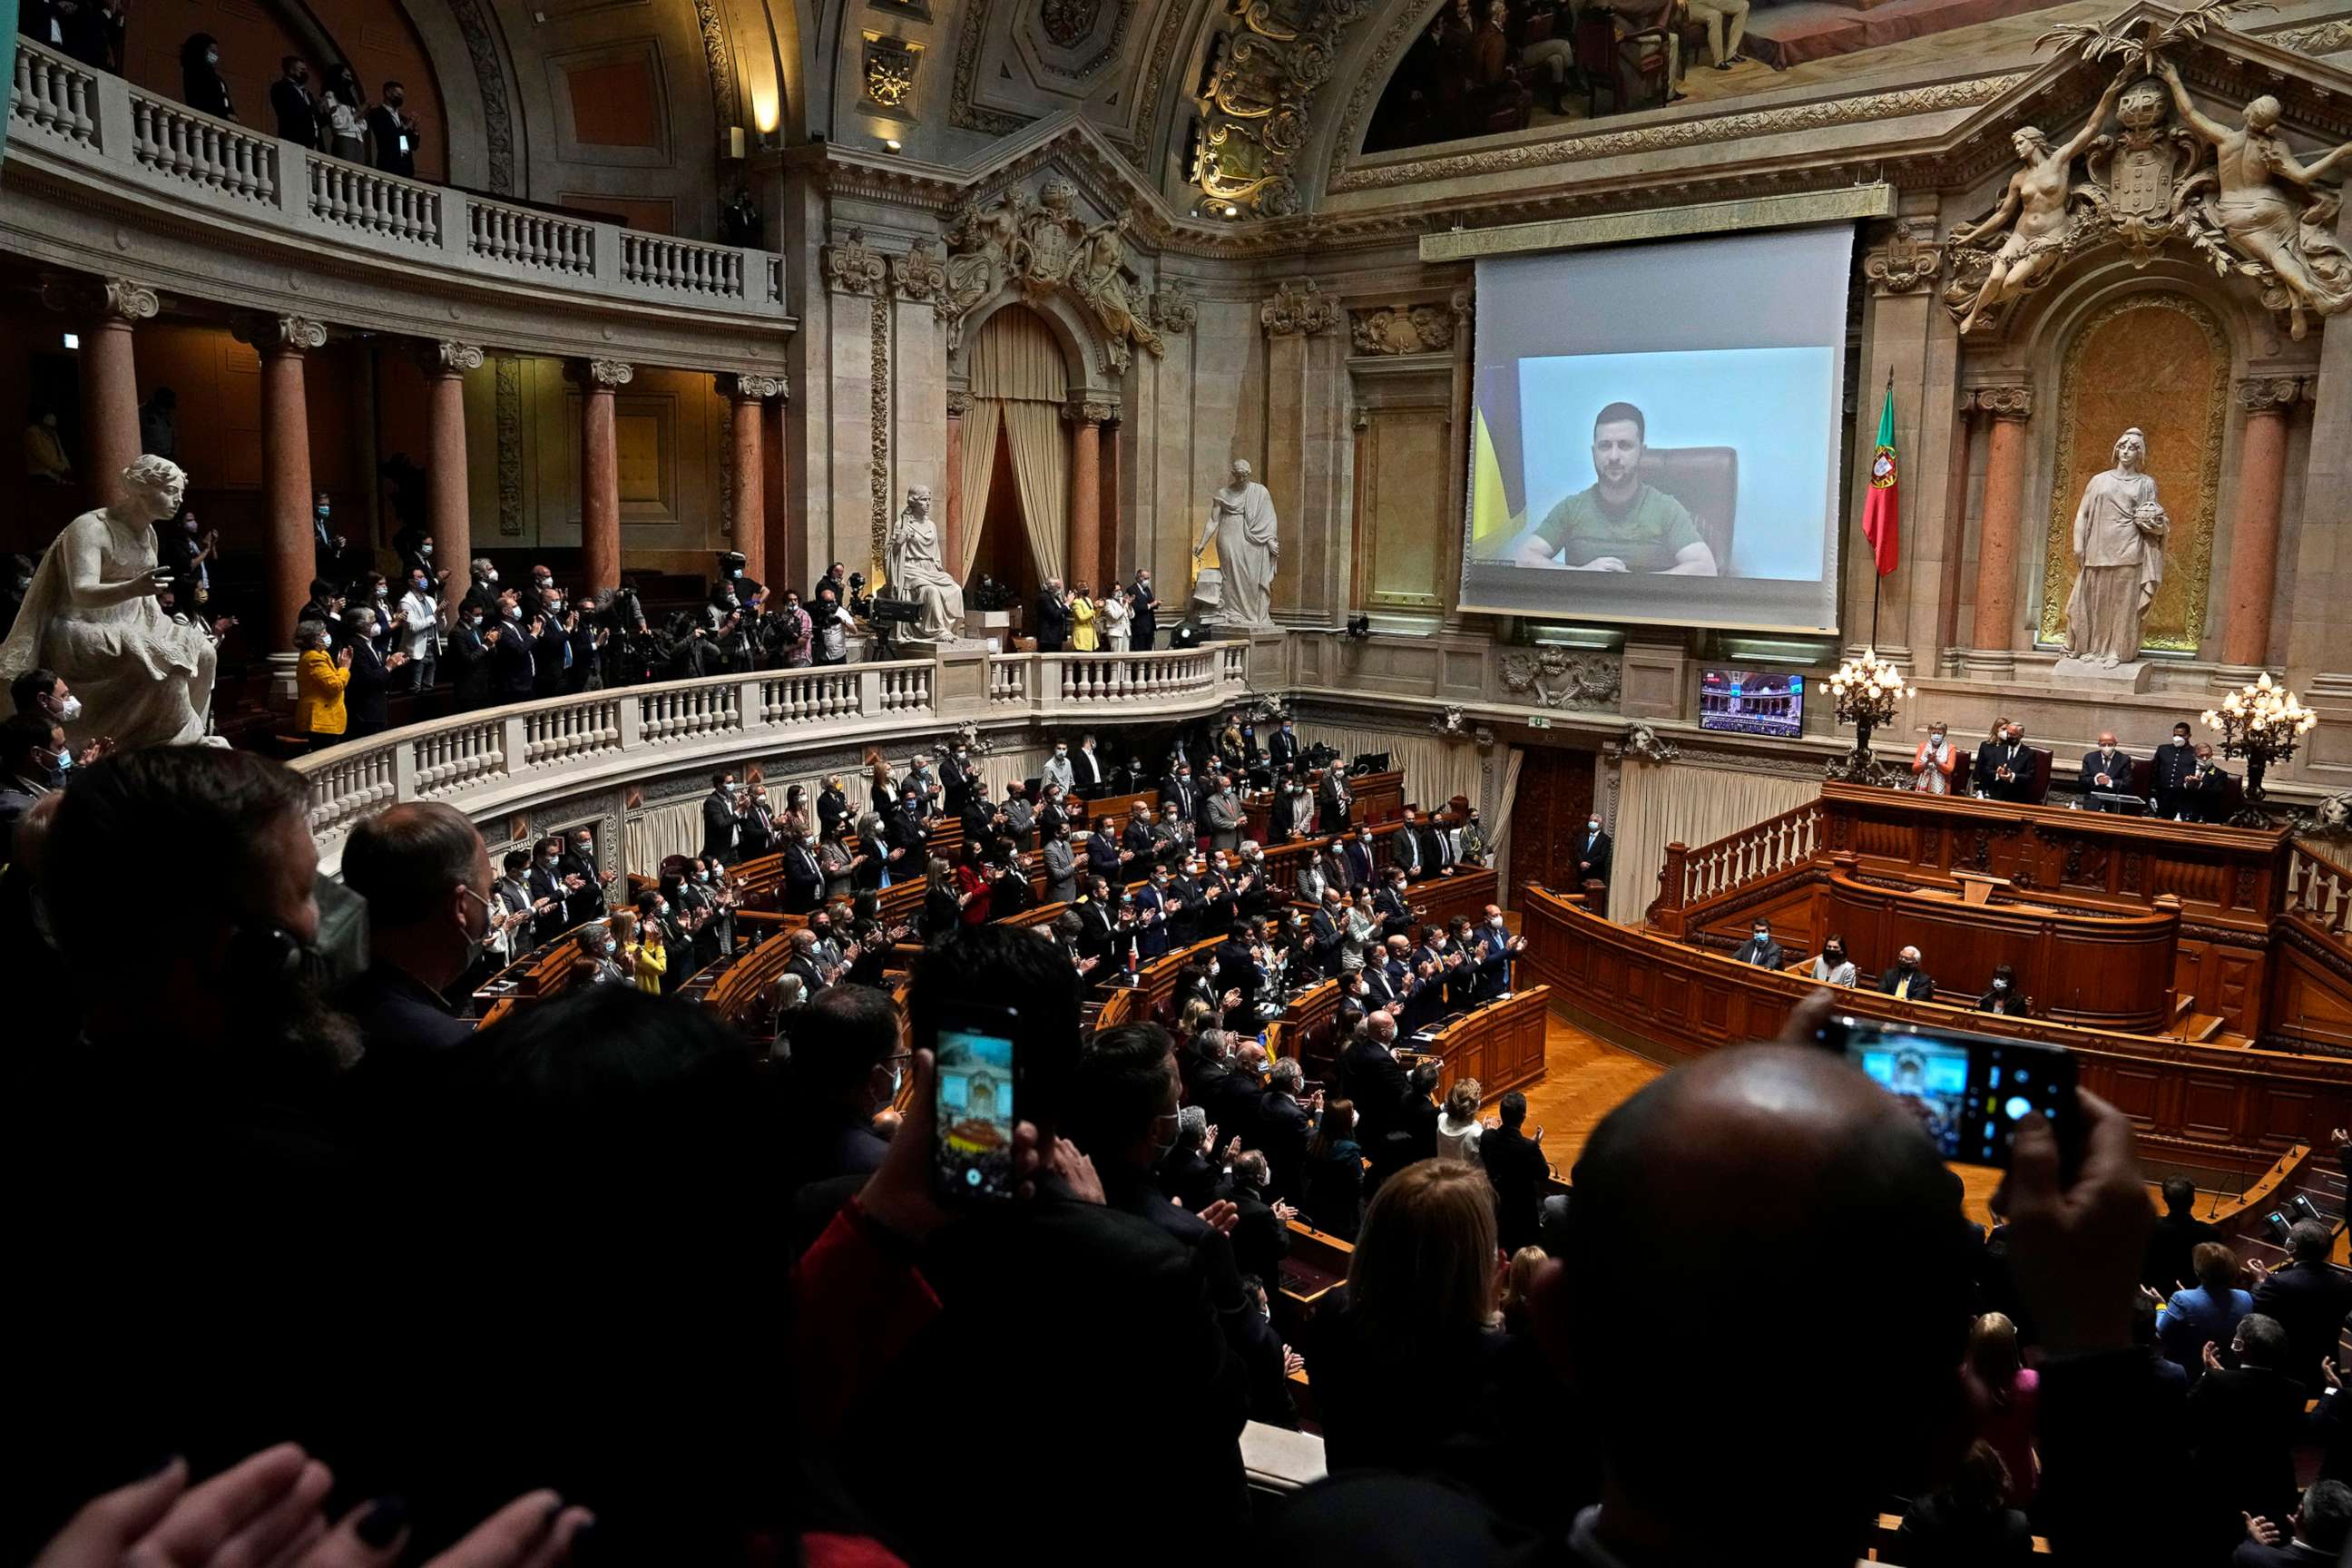 PHOTO: Members of Parliament and guests stand and applaud the speech of Ukrainian President Volodymyr Zelenskyy, after his address to the Portuguese parliament in Lisbon, via video conference, April 21, 2022.